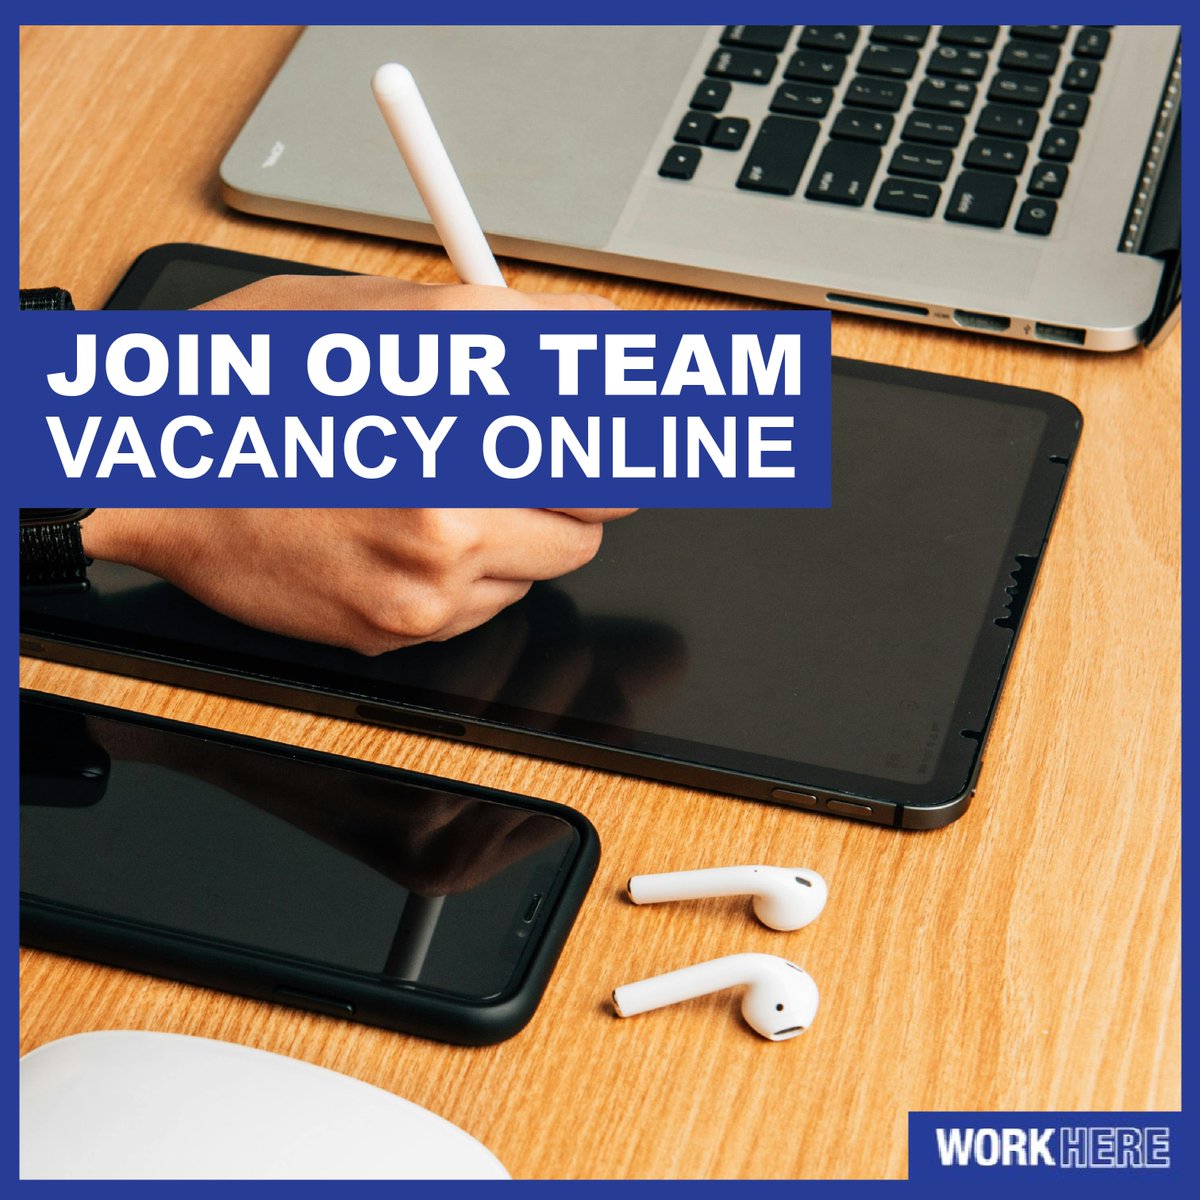 We have an exciting opportunity for you to join our team as a Digital Assistant based in #MotherwellLib. This role gives you the chance to offer key digital support to the public as part of our open learning team. Find out more and apply: bit.ly/4aPw6pS #LibraryJobs